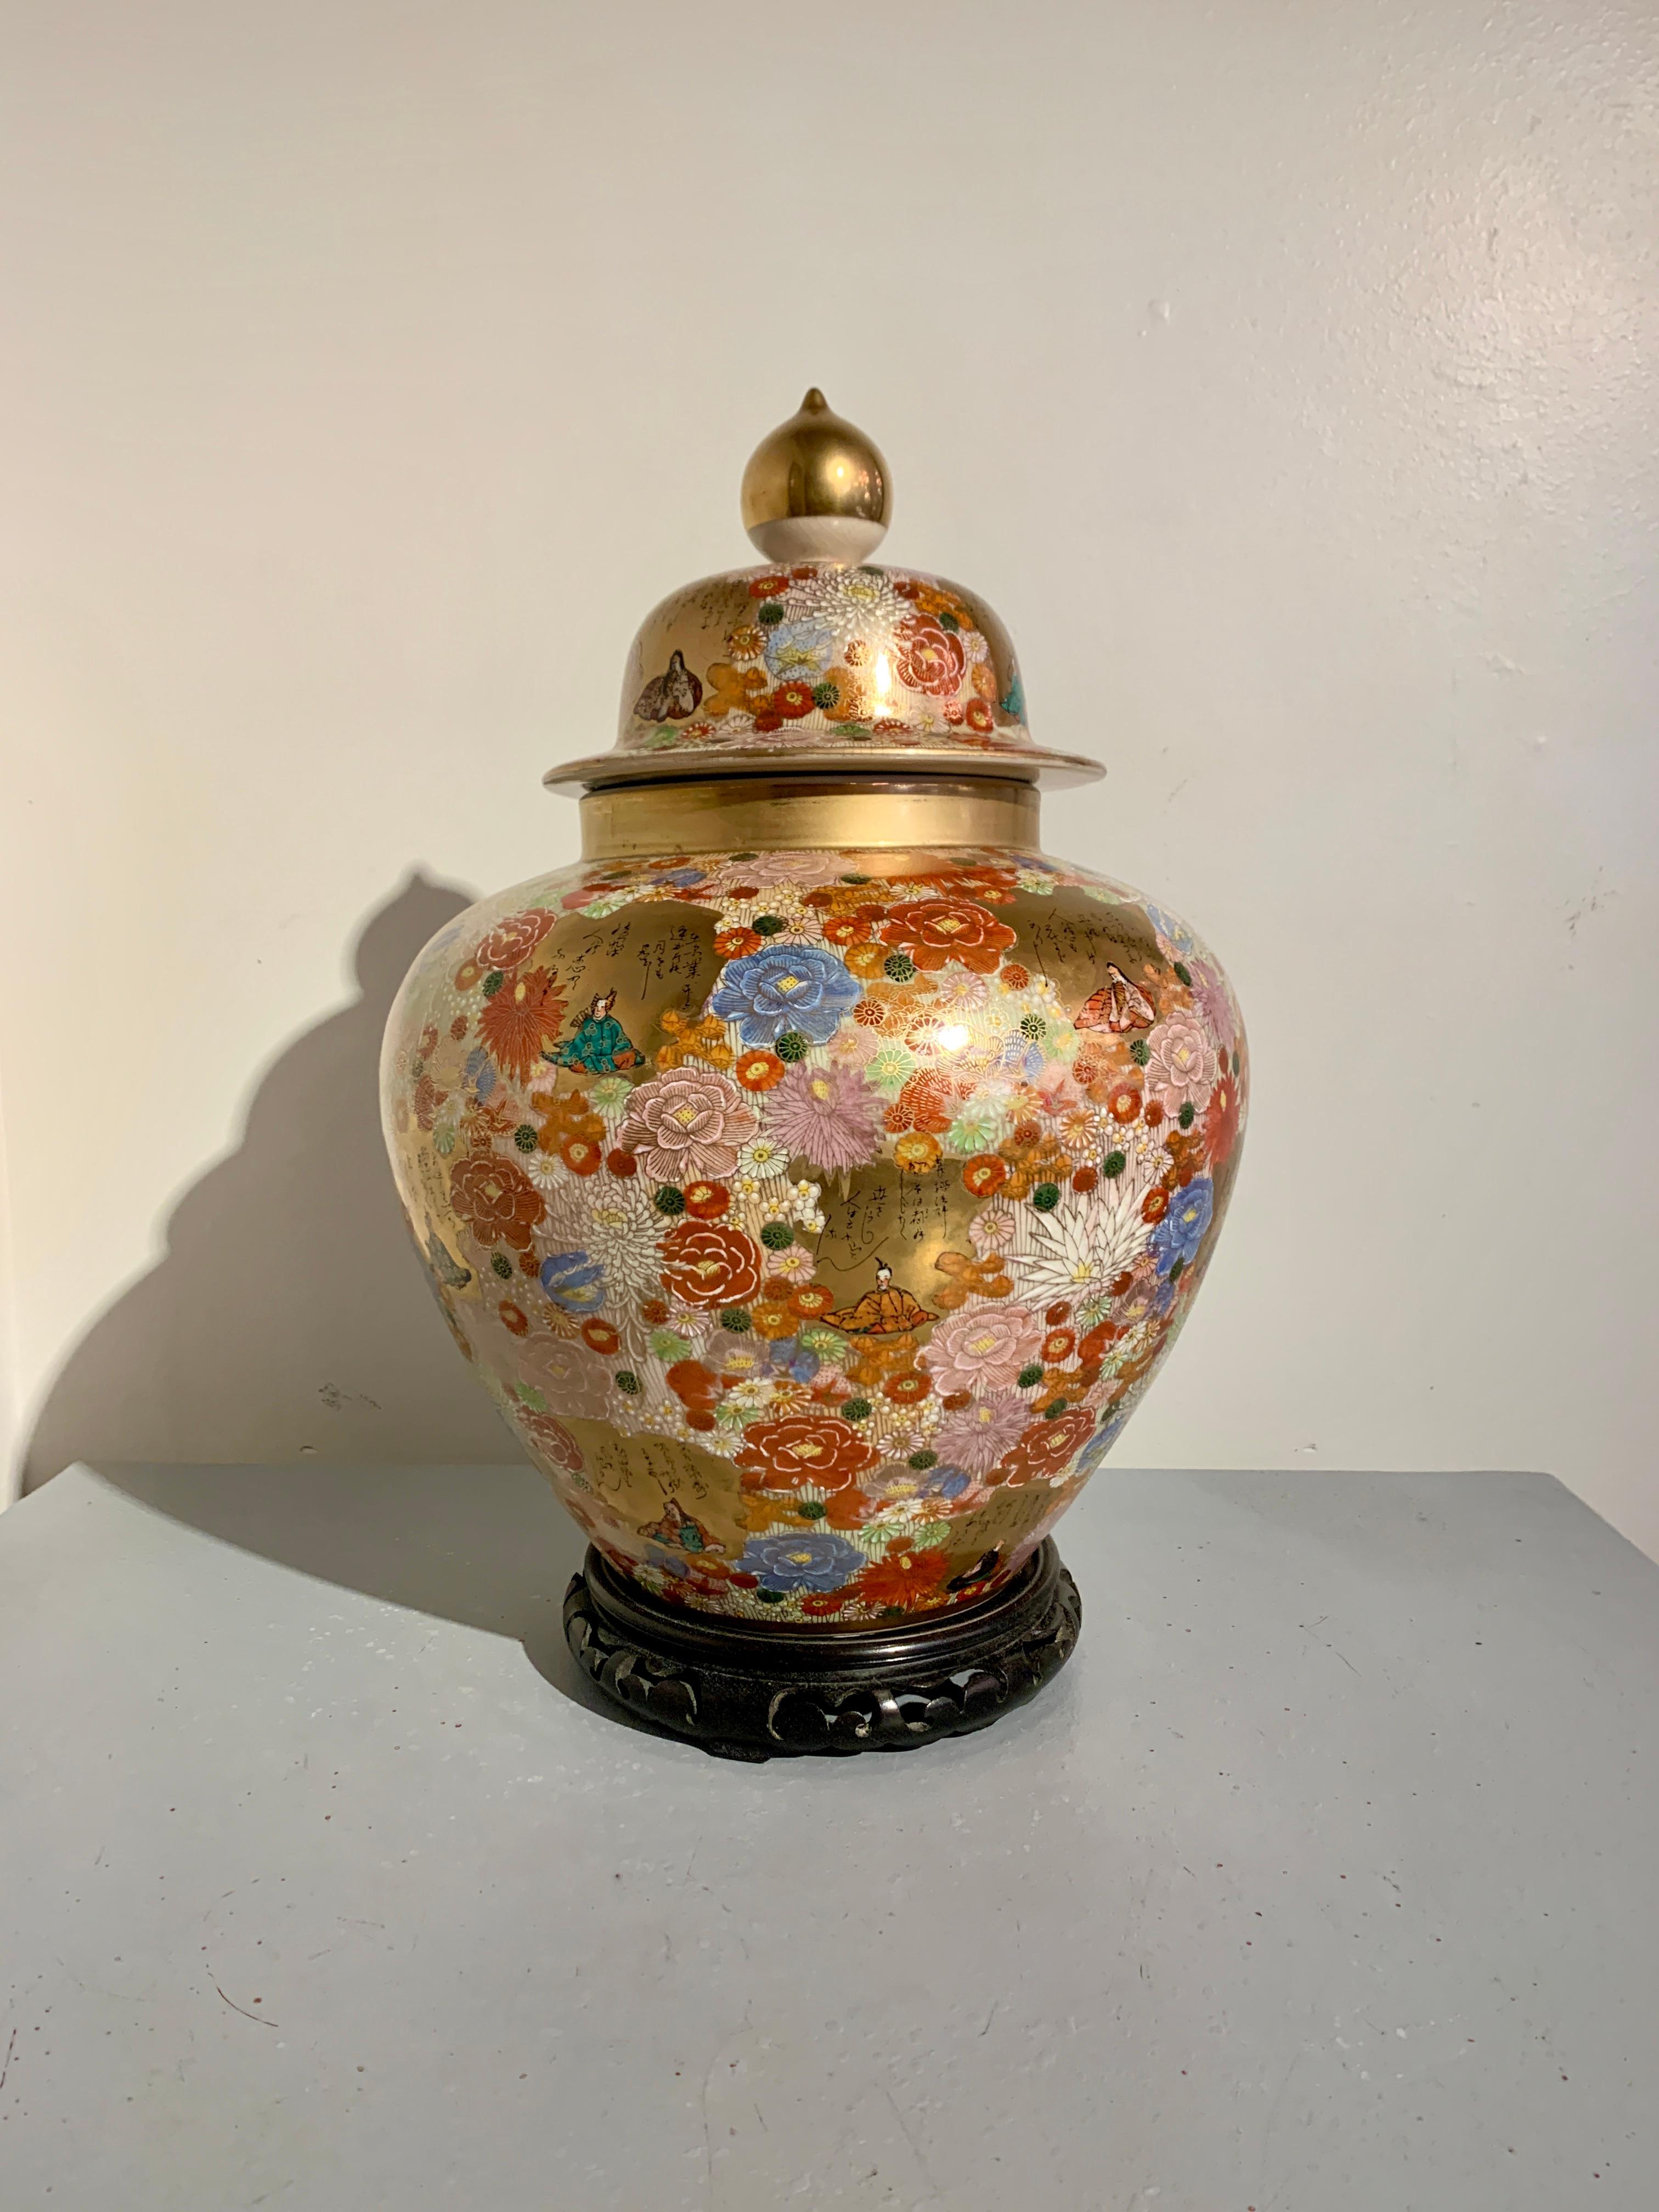 A large highly decorated Japanese Satsuma millefleur covered vase, marked Satsuma, Showa period, mid 20th century, Japan.

The large vase of attractive baluster form, with a slightly splayed foot, narrow waist, and tapered body with high shoulders